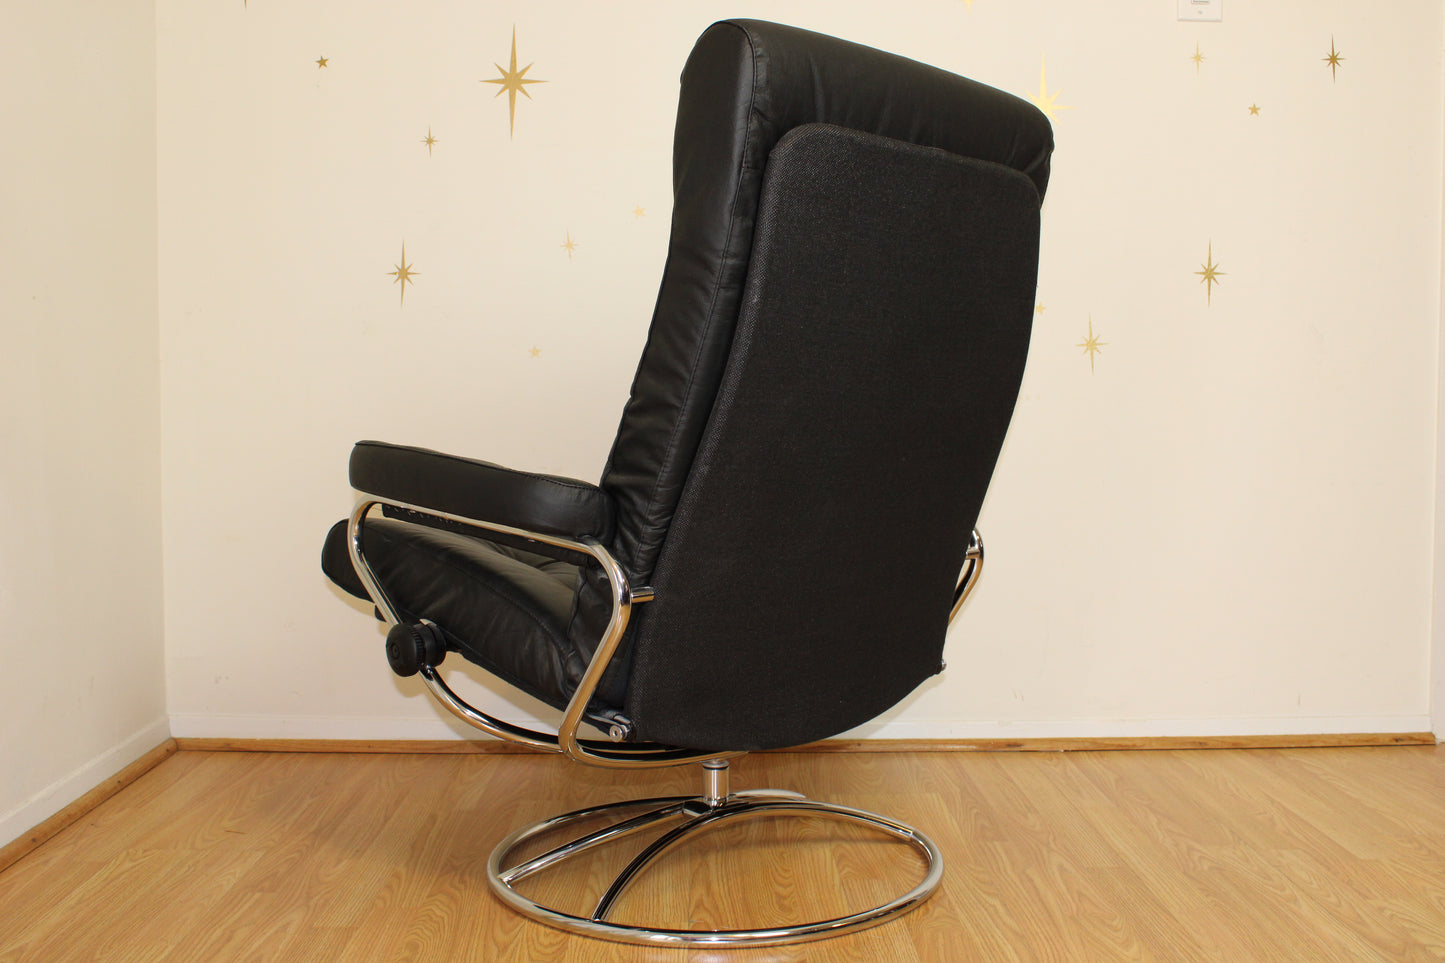 Vintage Ekornes Stressless Reclining Lounge Chair and Ottoman